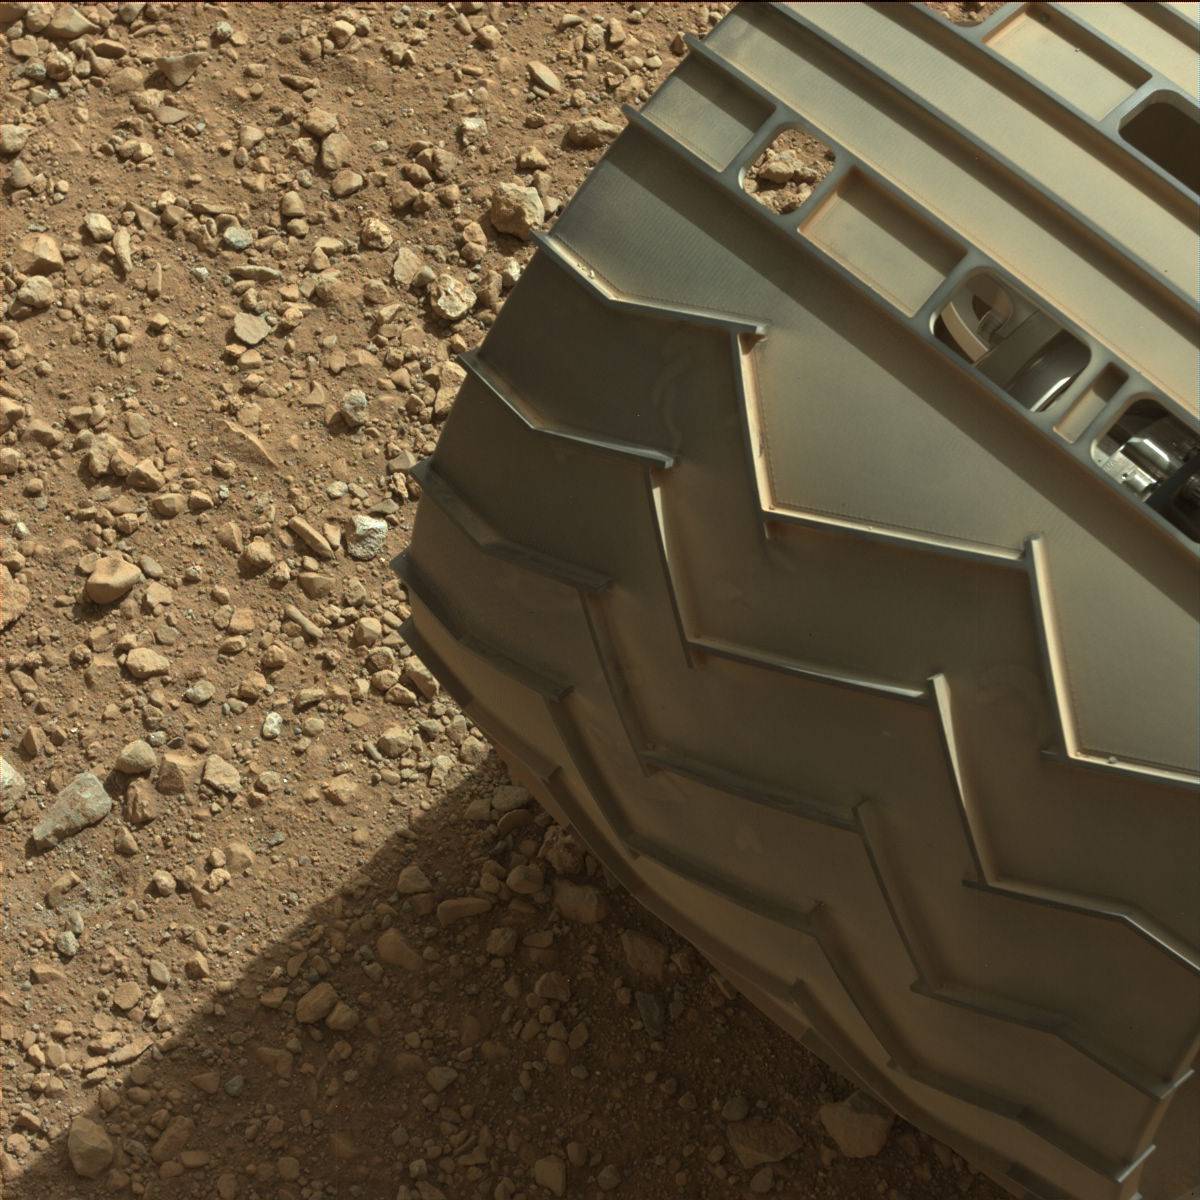 close-up photo of MSL Curiosity rover&rsquo;s wheel on Mars